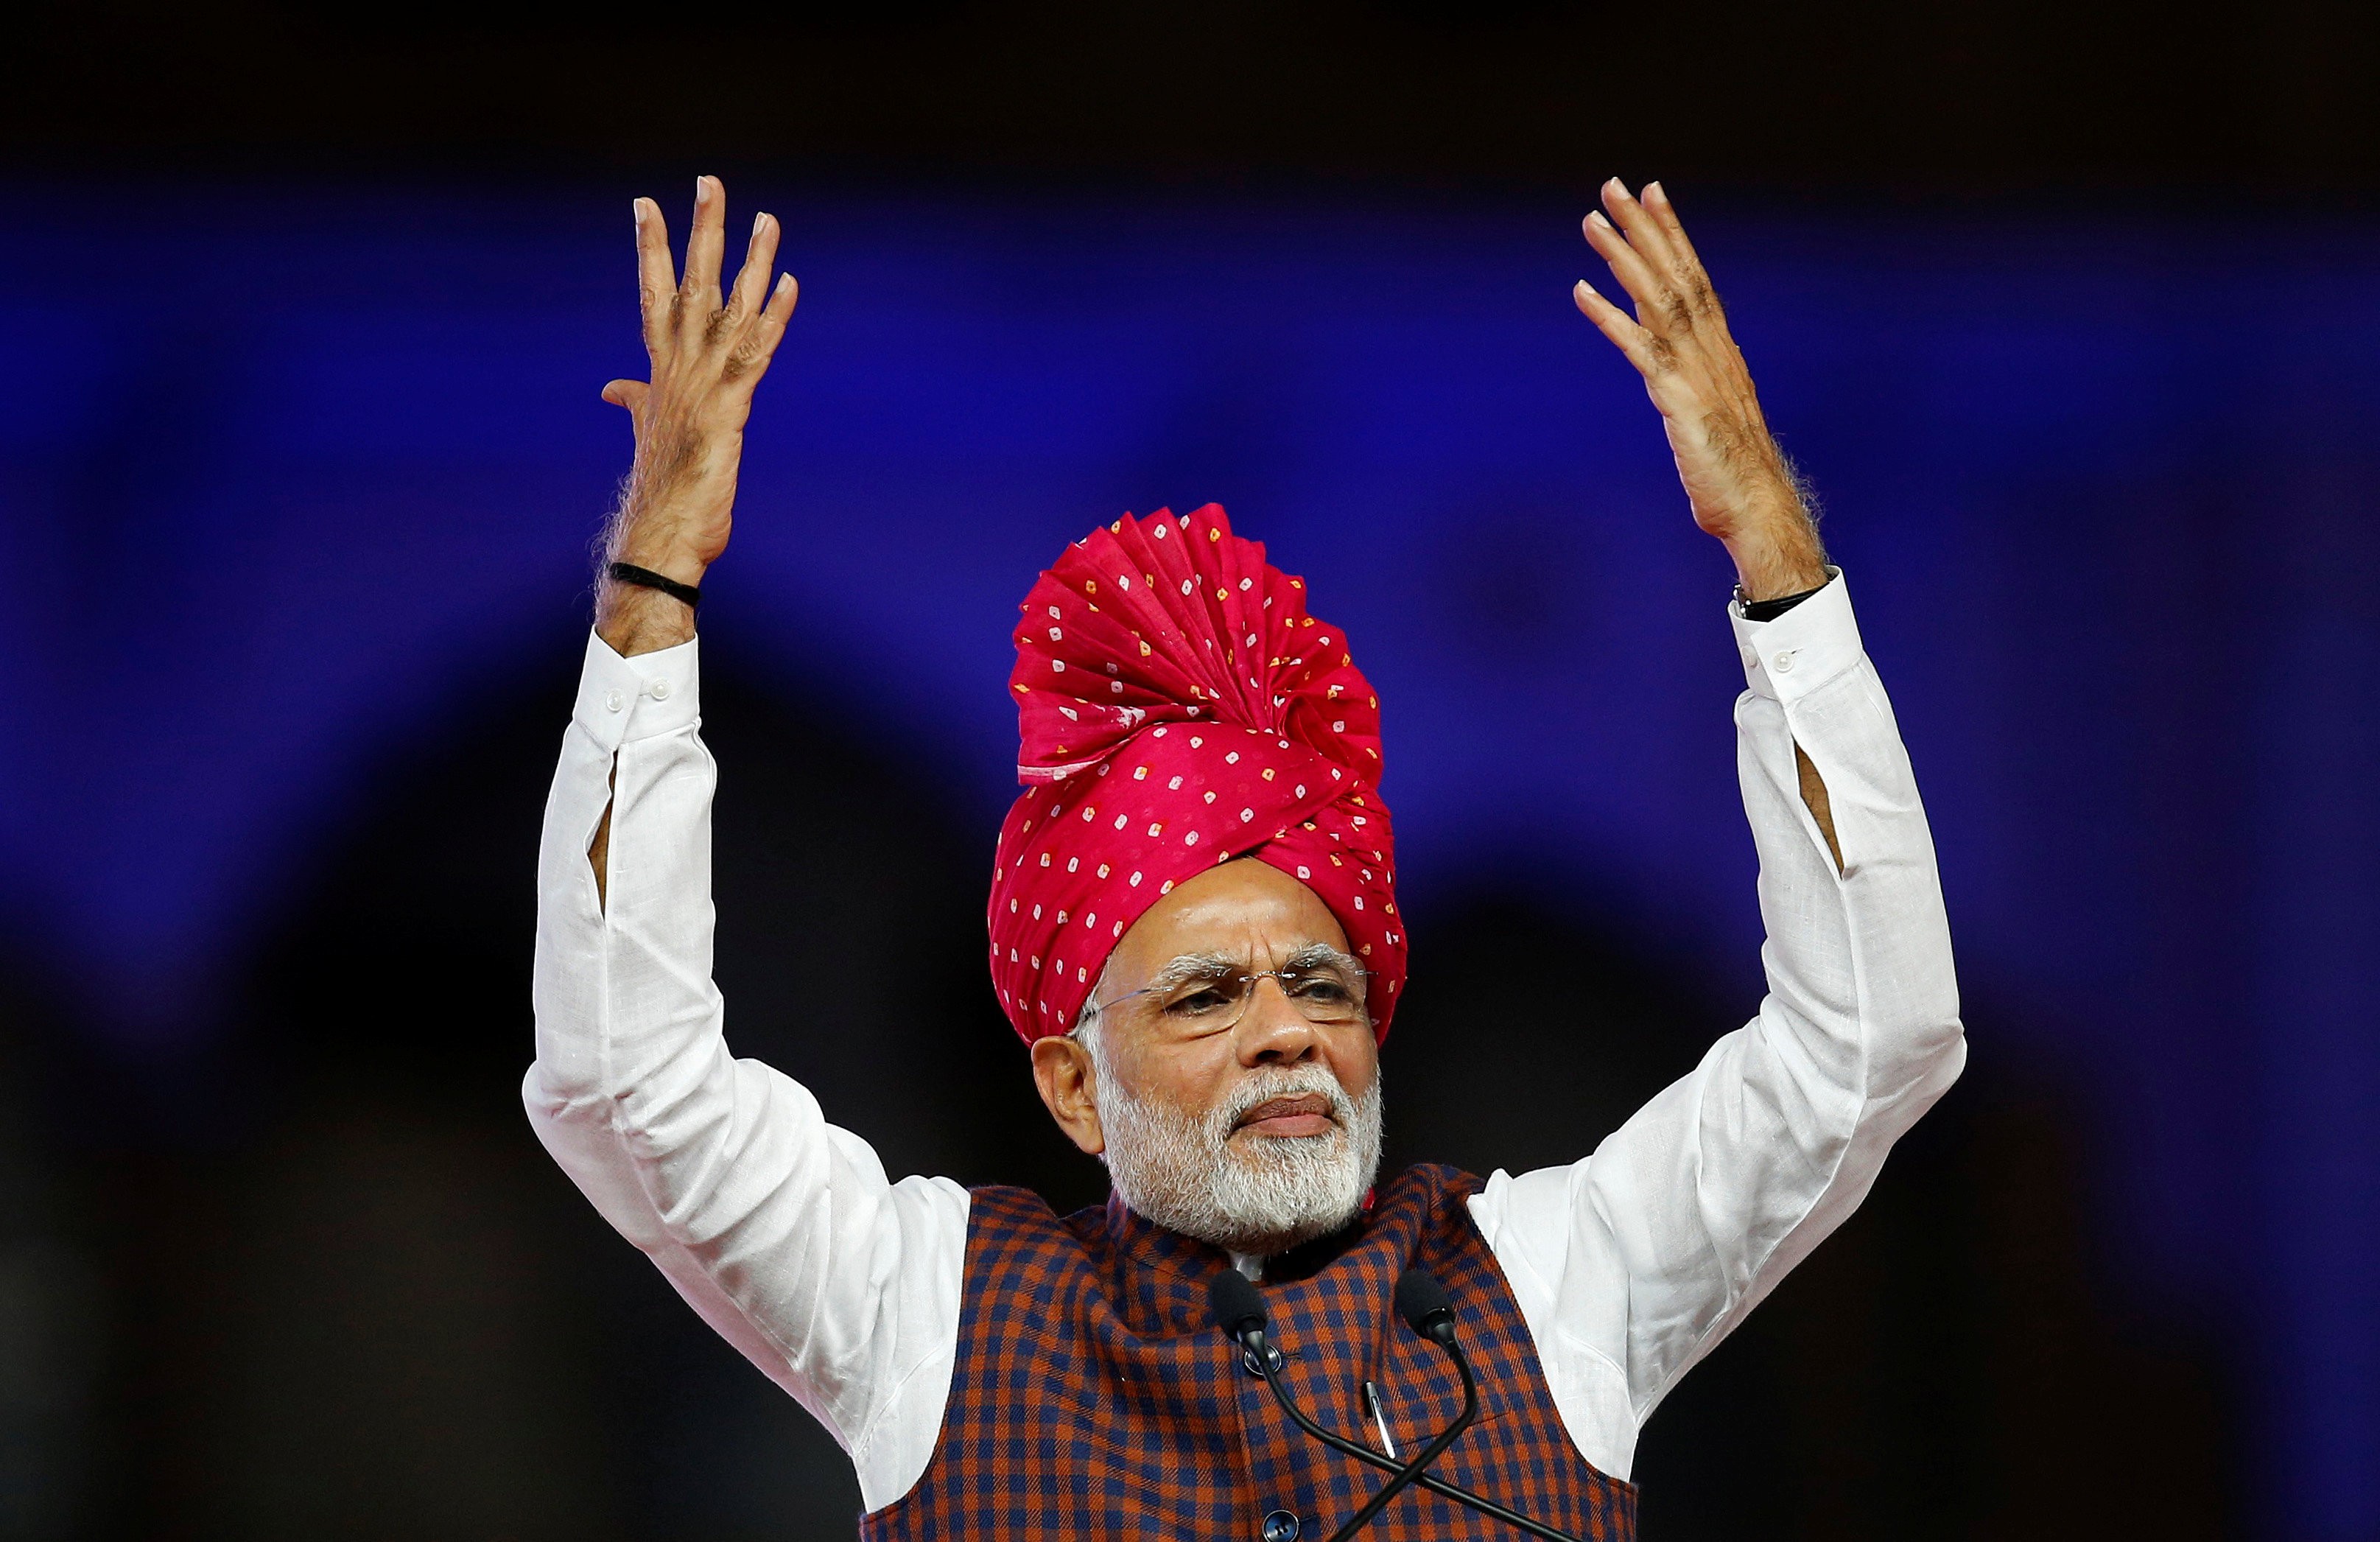 Narendra Modi addresses supporters at a campaign rally in Ahmadabad, Gujarat’s largest city. Photo: Reuters